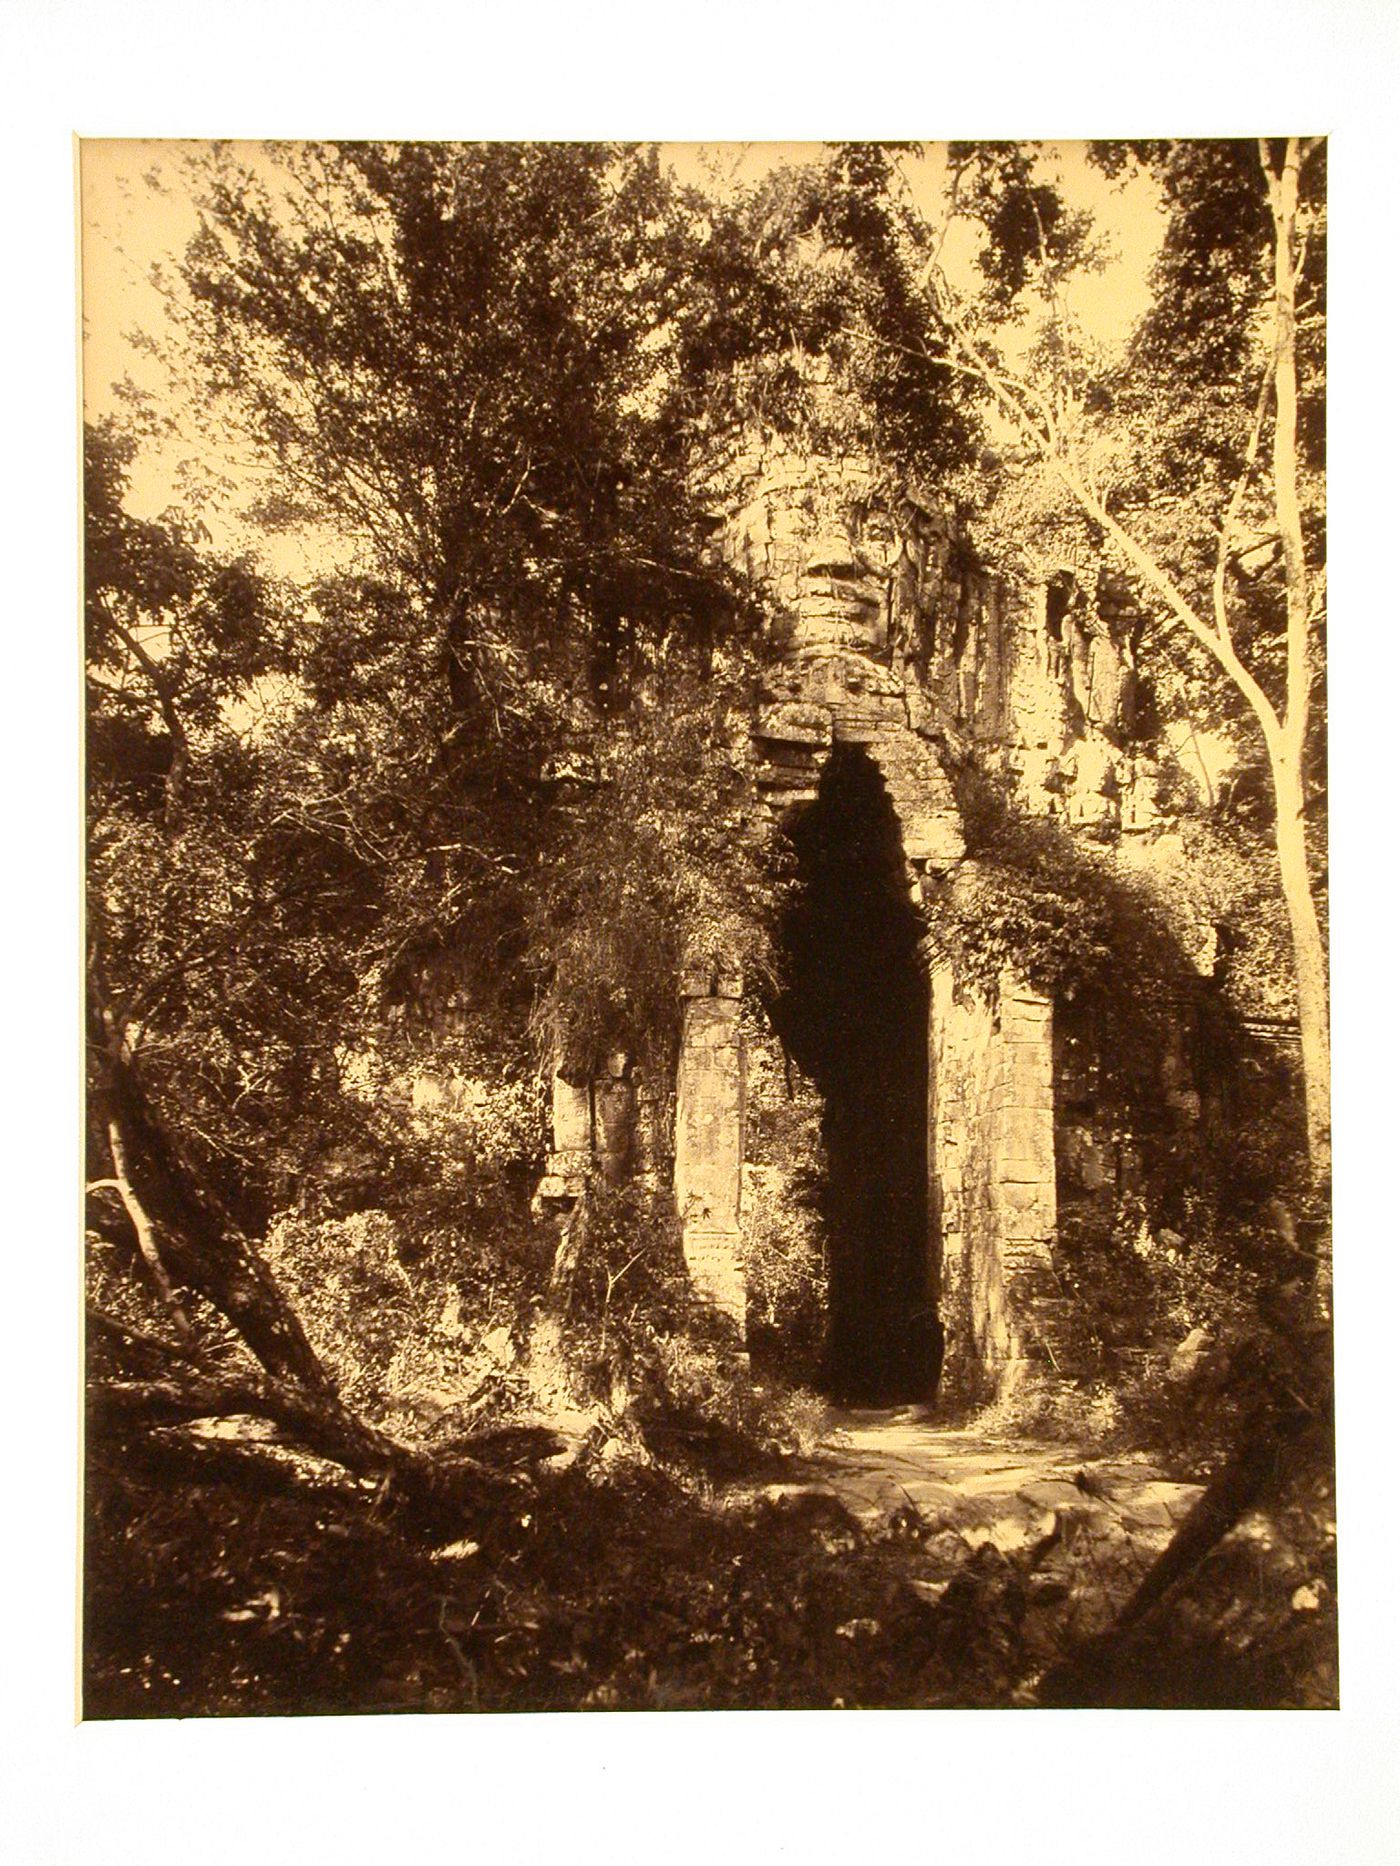 View of the west gate, Angkor Thom, Siam (now in Cambodia)